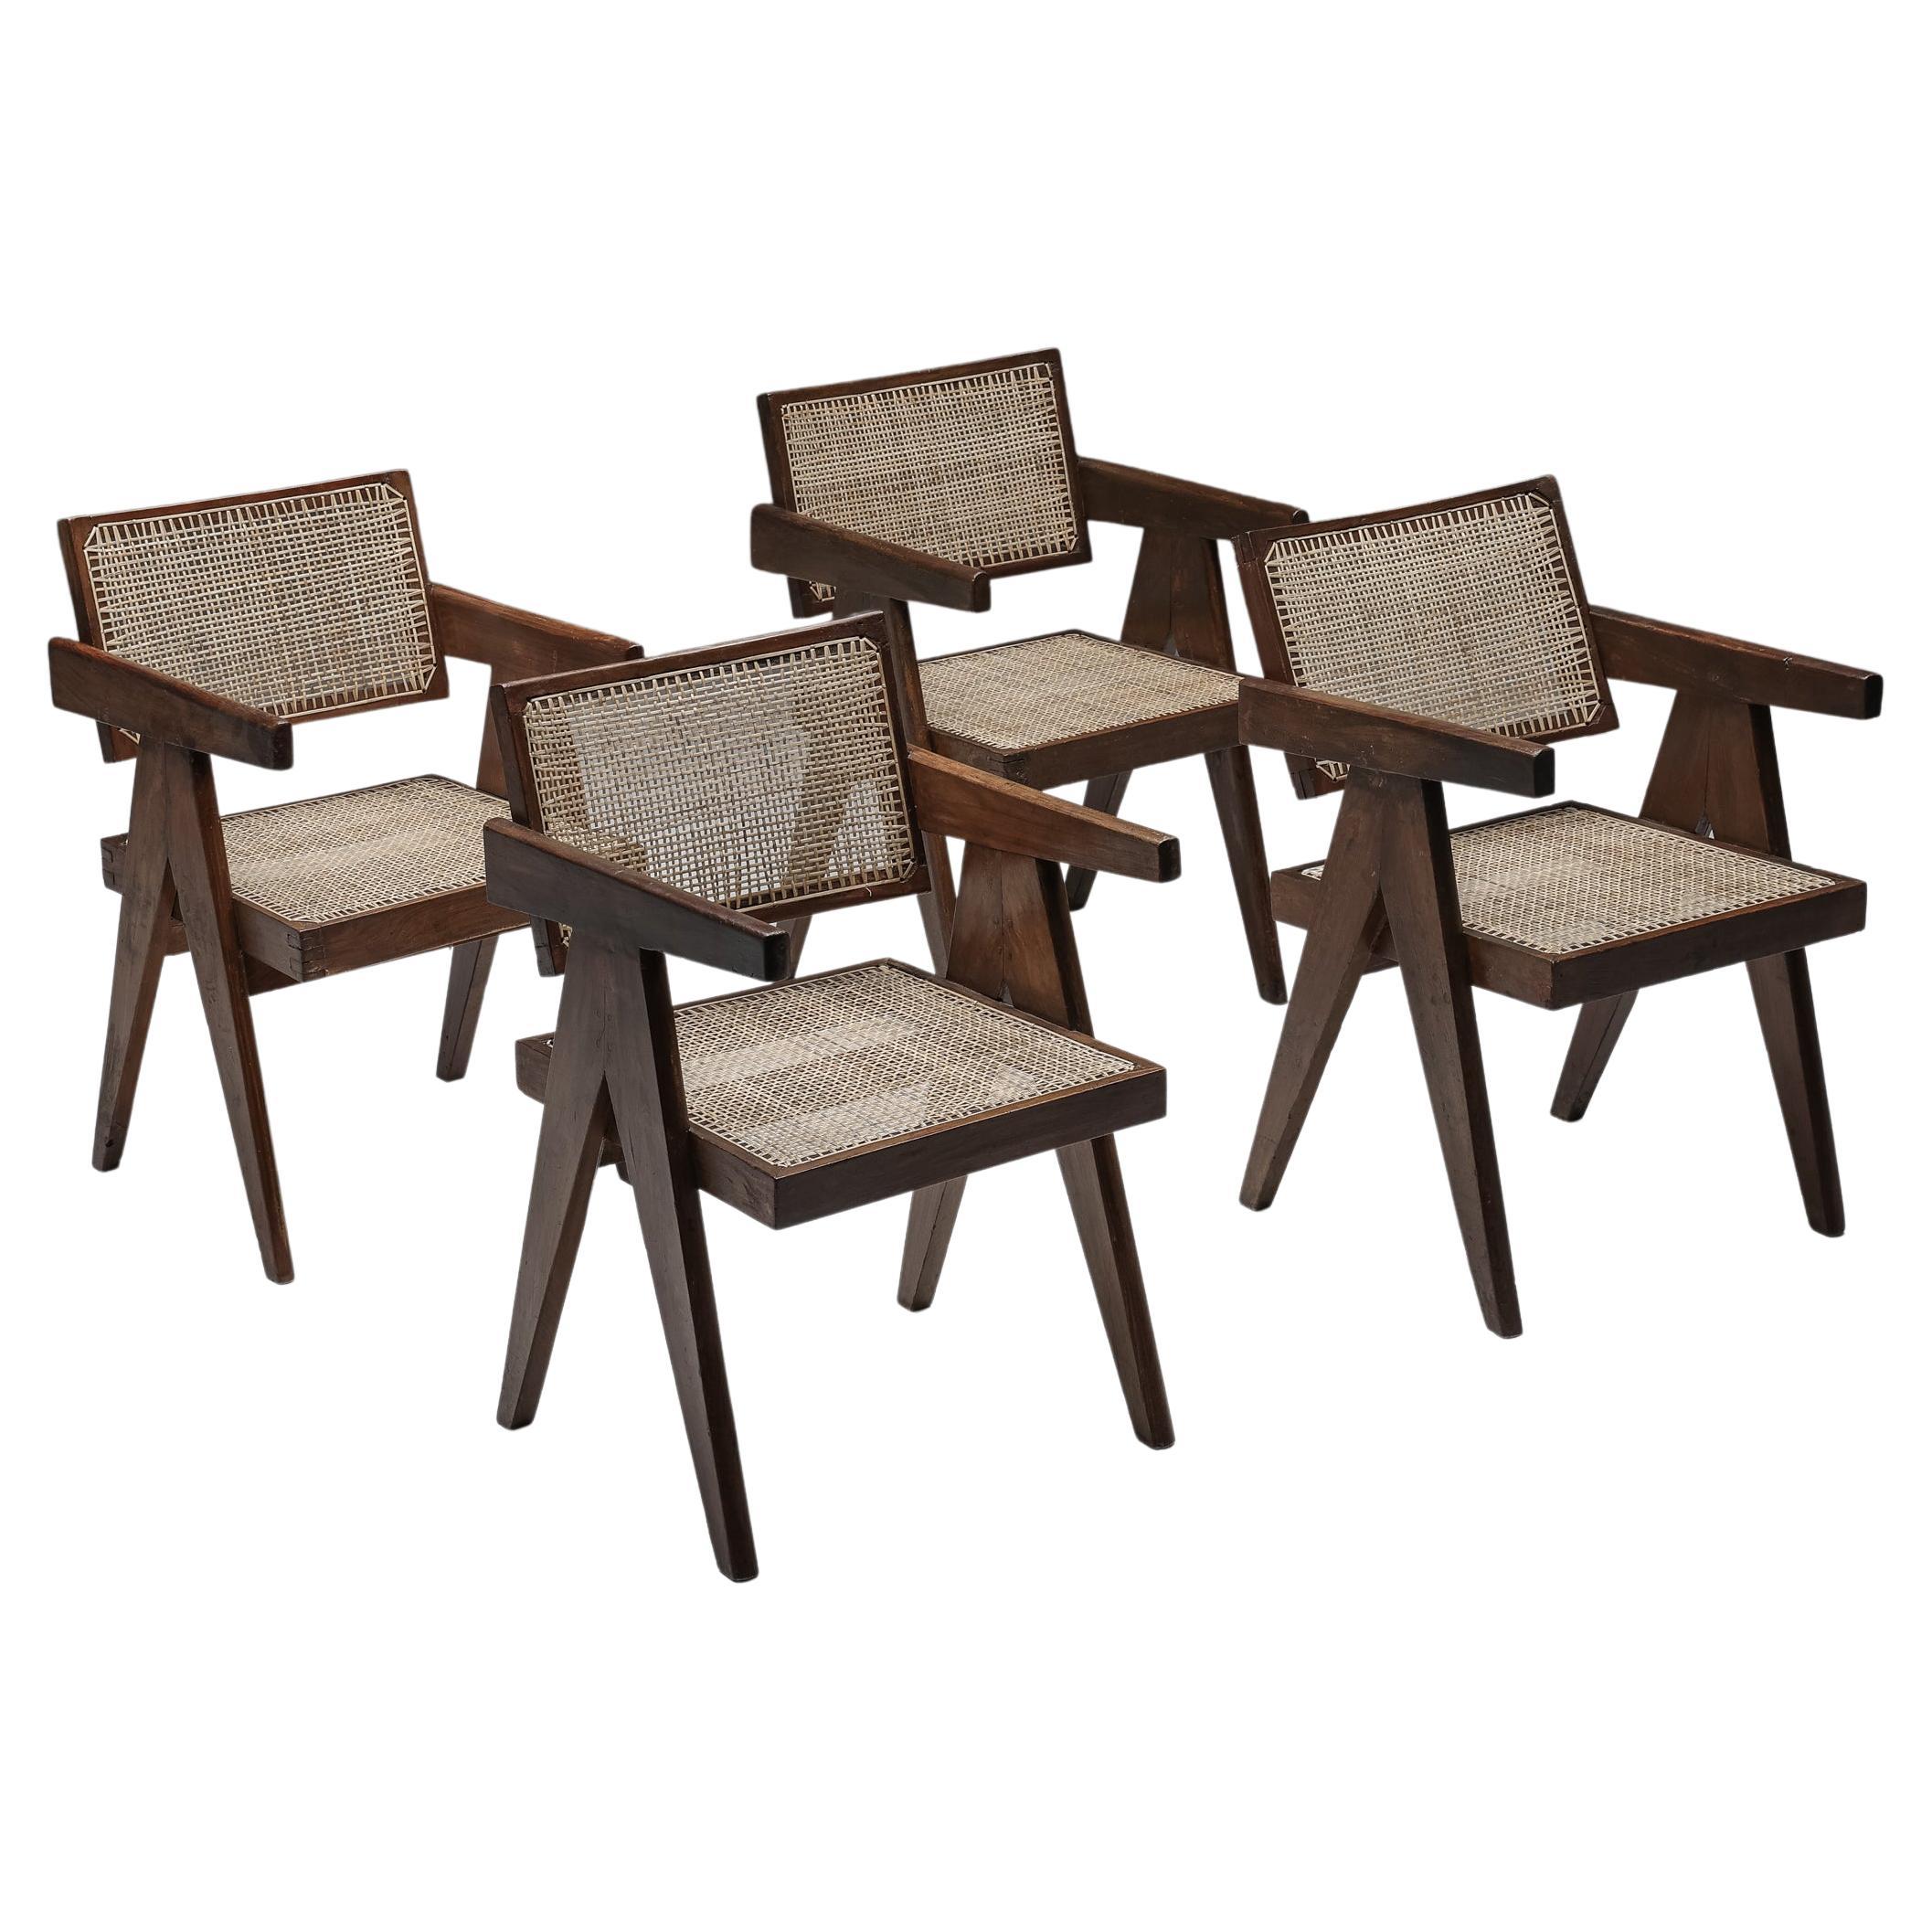 Office Cane Chairs by Pierre Jeanneret, PJ-SI-28-A, Chandigarh, 1955